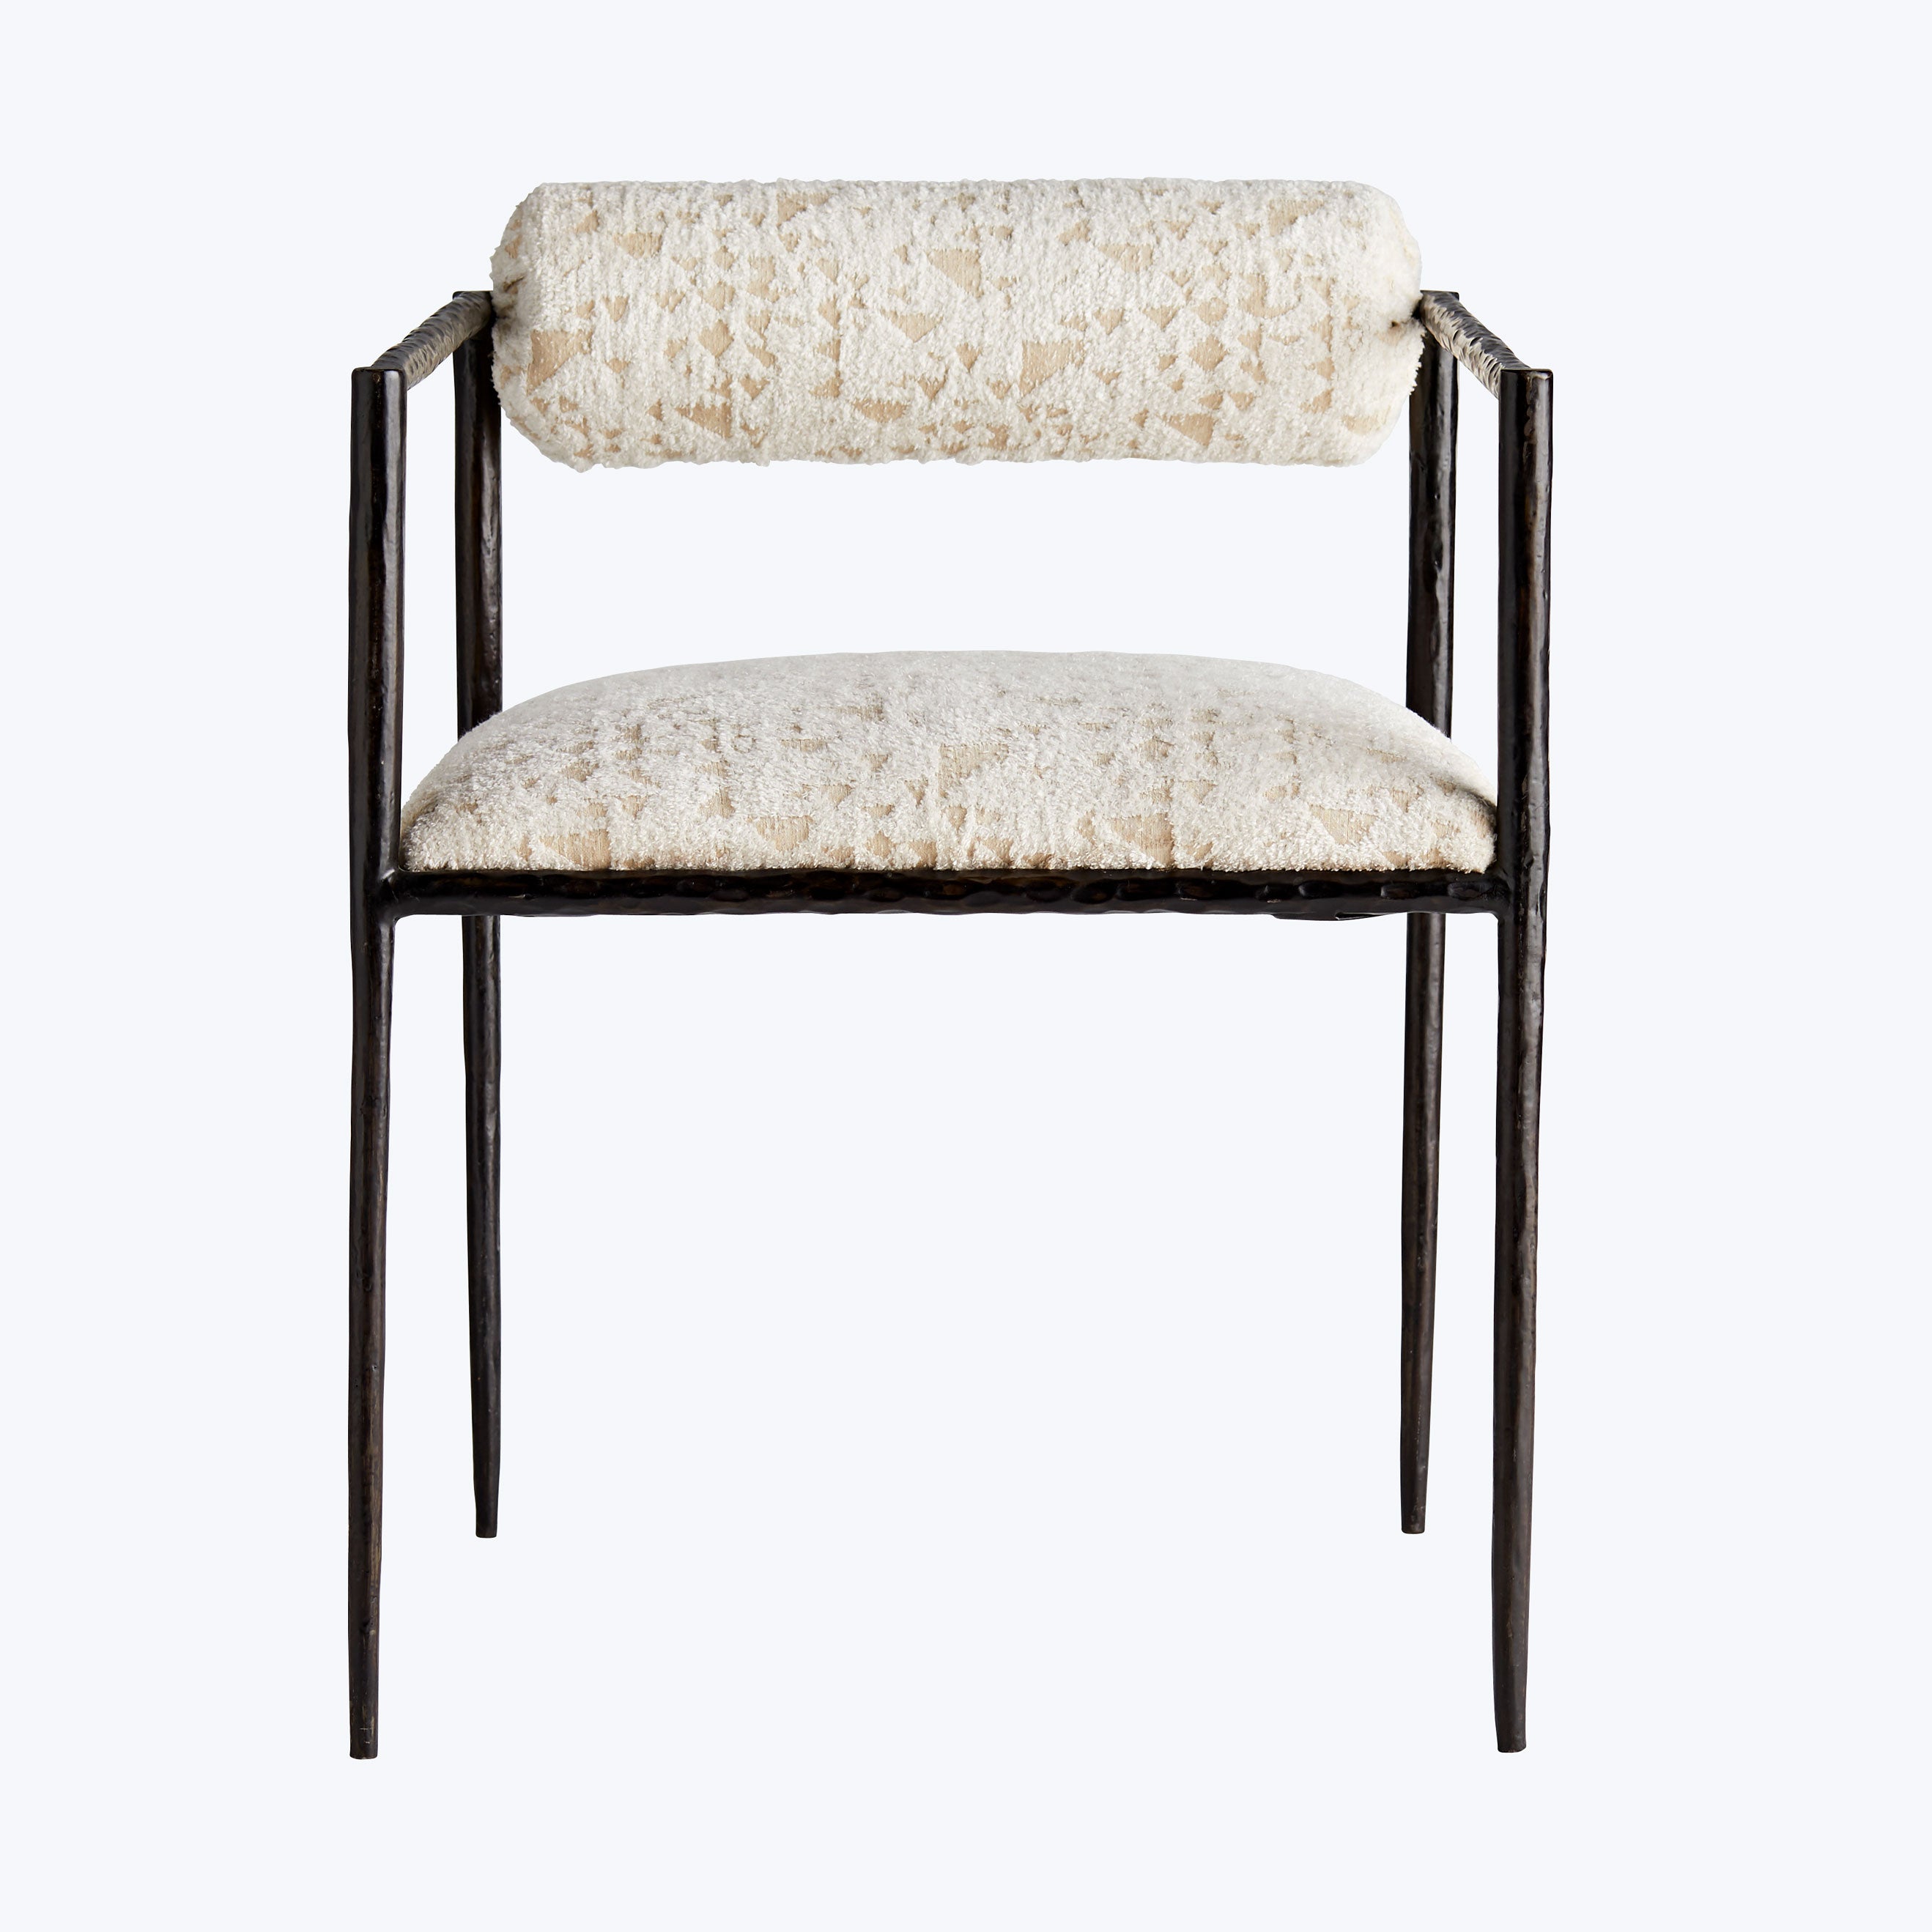 Minimalist metal-framed chair with cushioned neutral fabric in stylish interior.